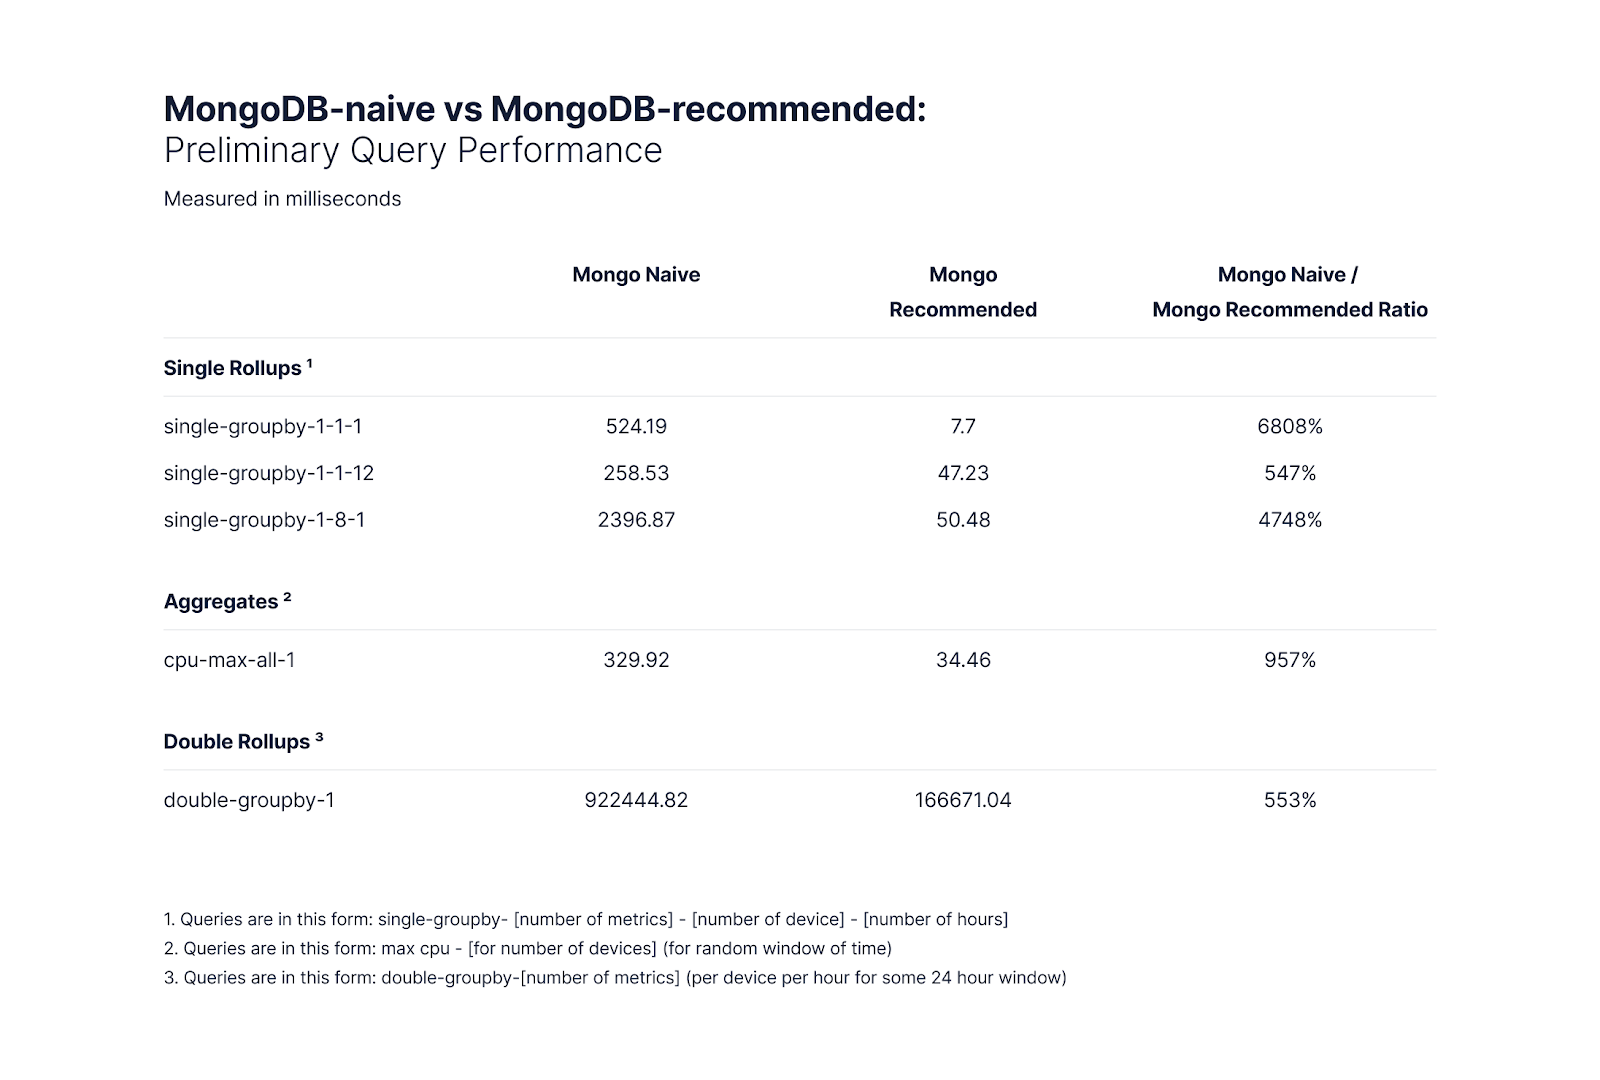 Mongo-recommended outperforms Mongo-naive by 5x-68x, depending on the query